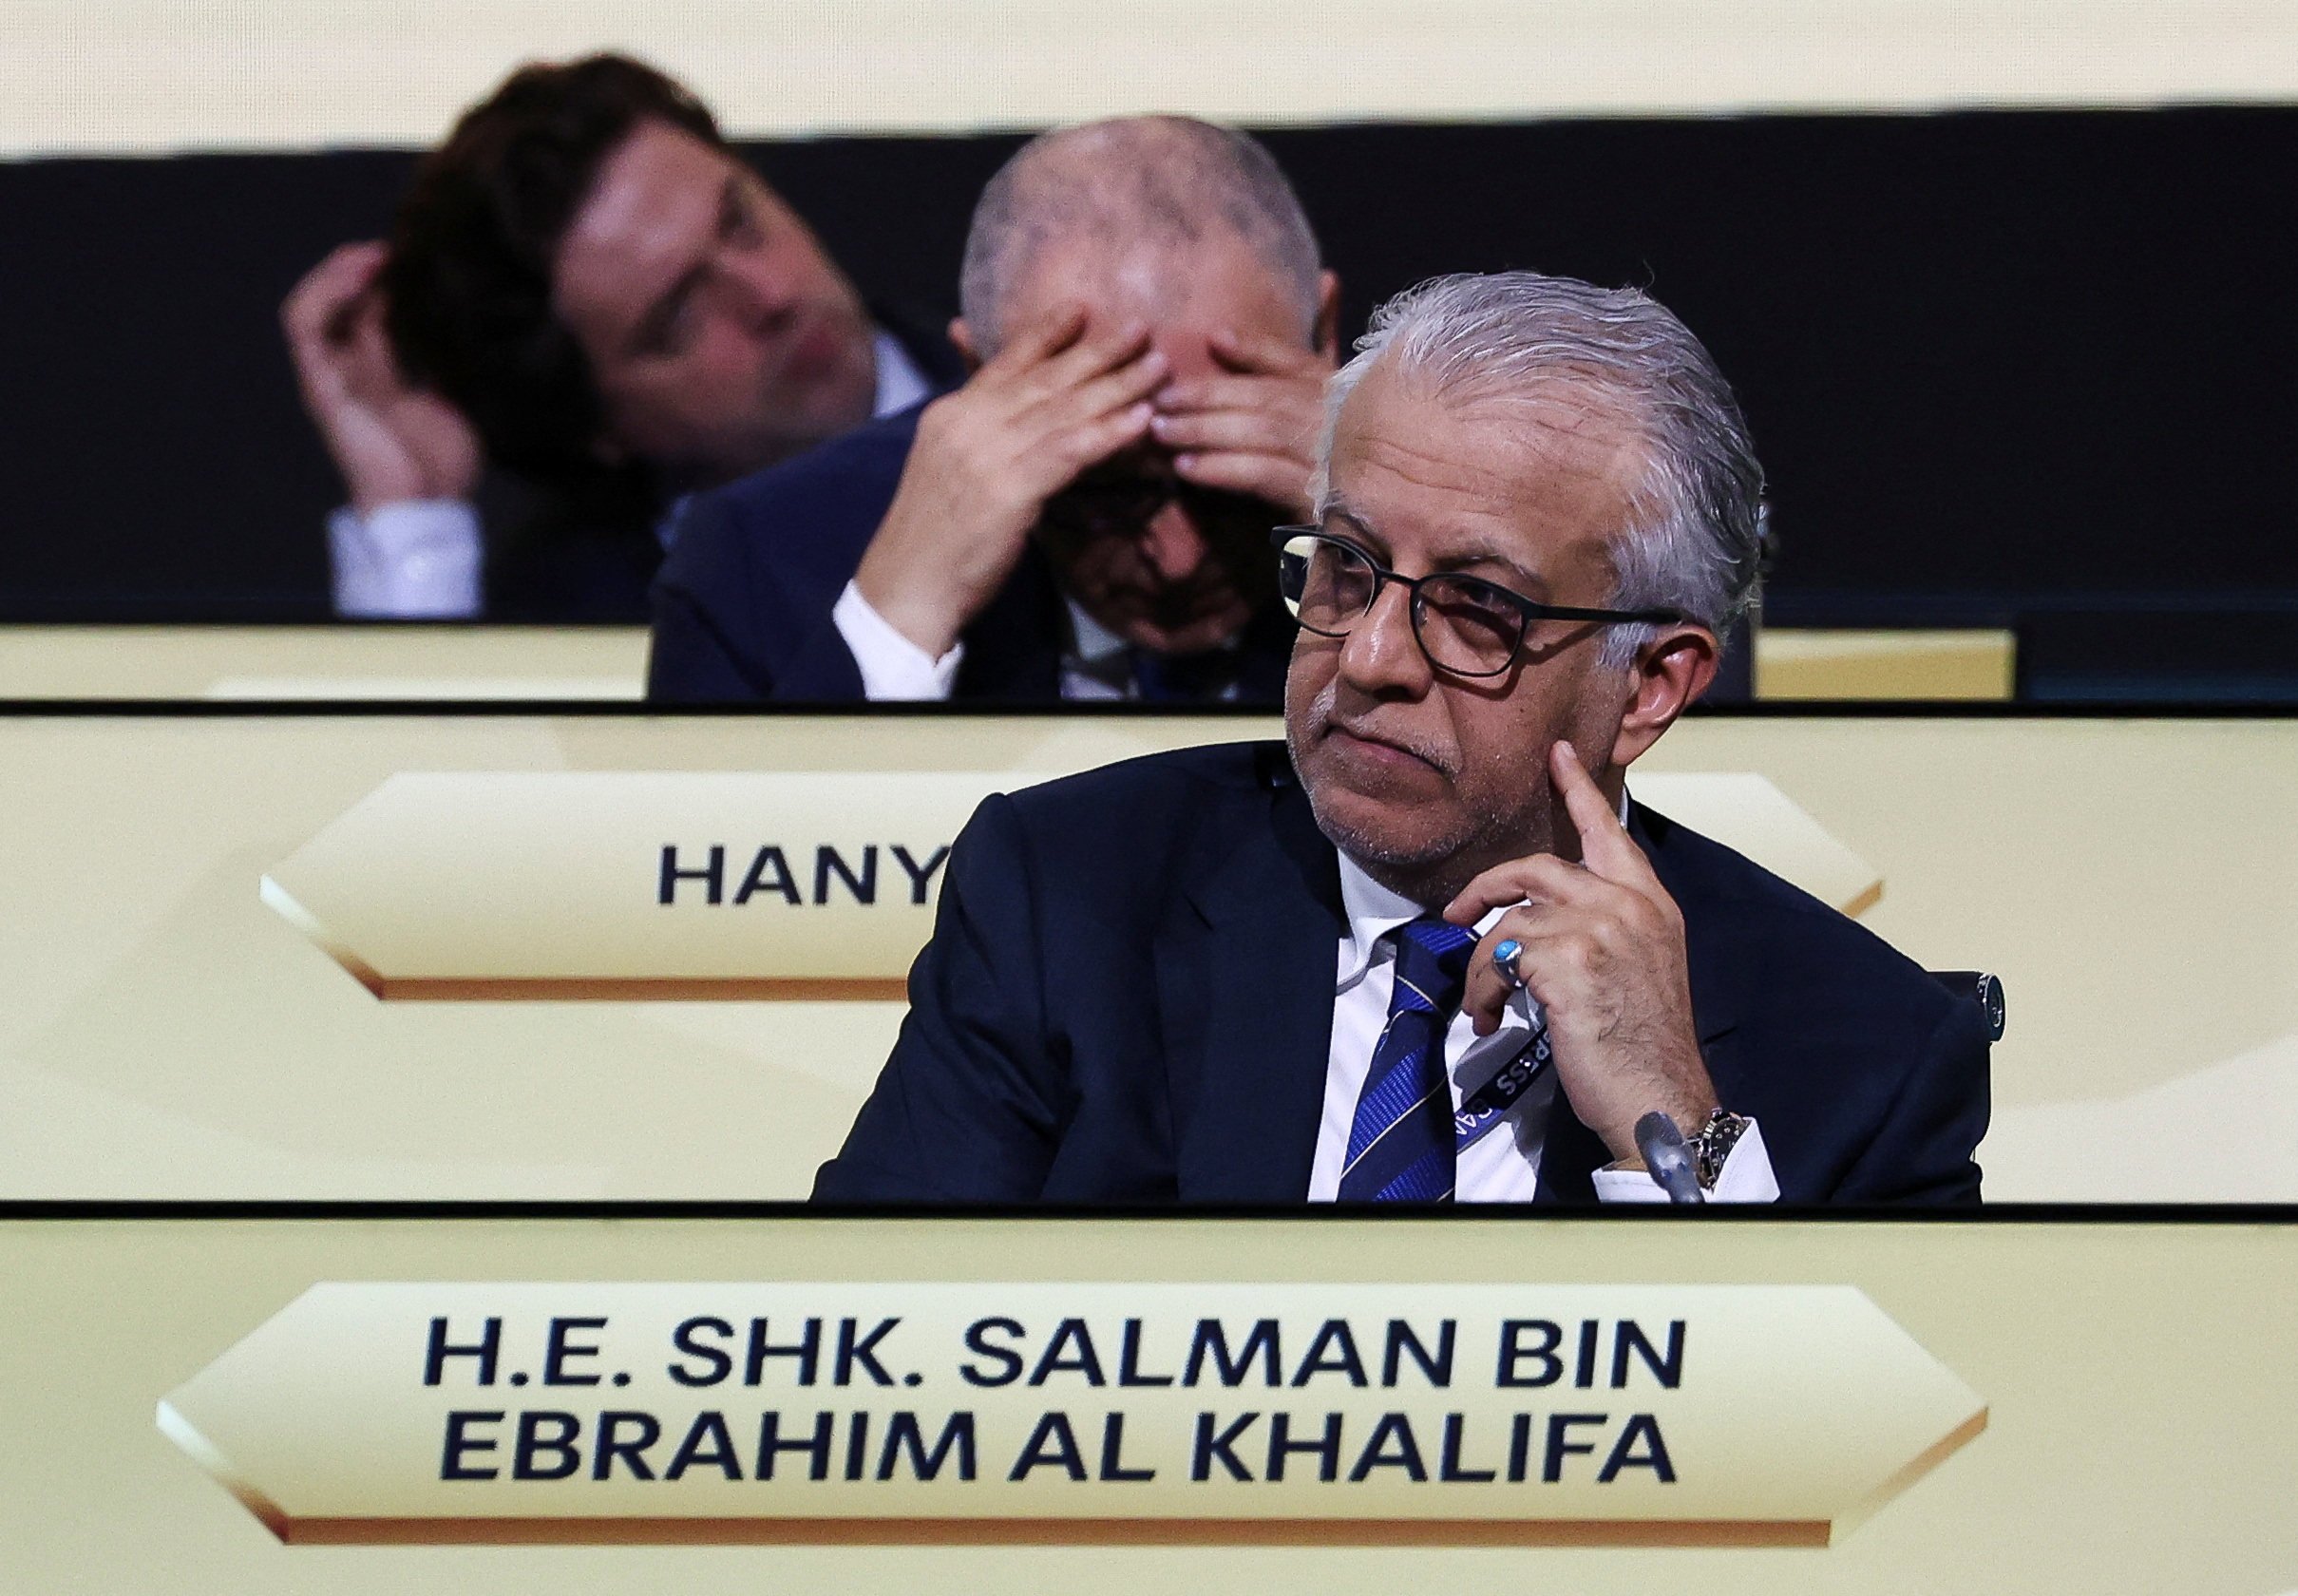 AFC president Sheikh Salman bin Ibrahim Al Khalifa can seek re-election in 2027 after the reforms were passed. Photo: Reuters